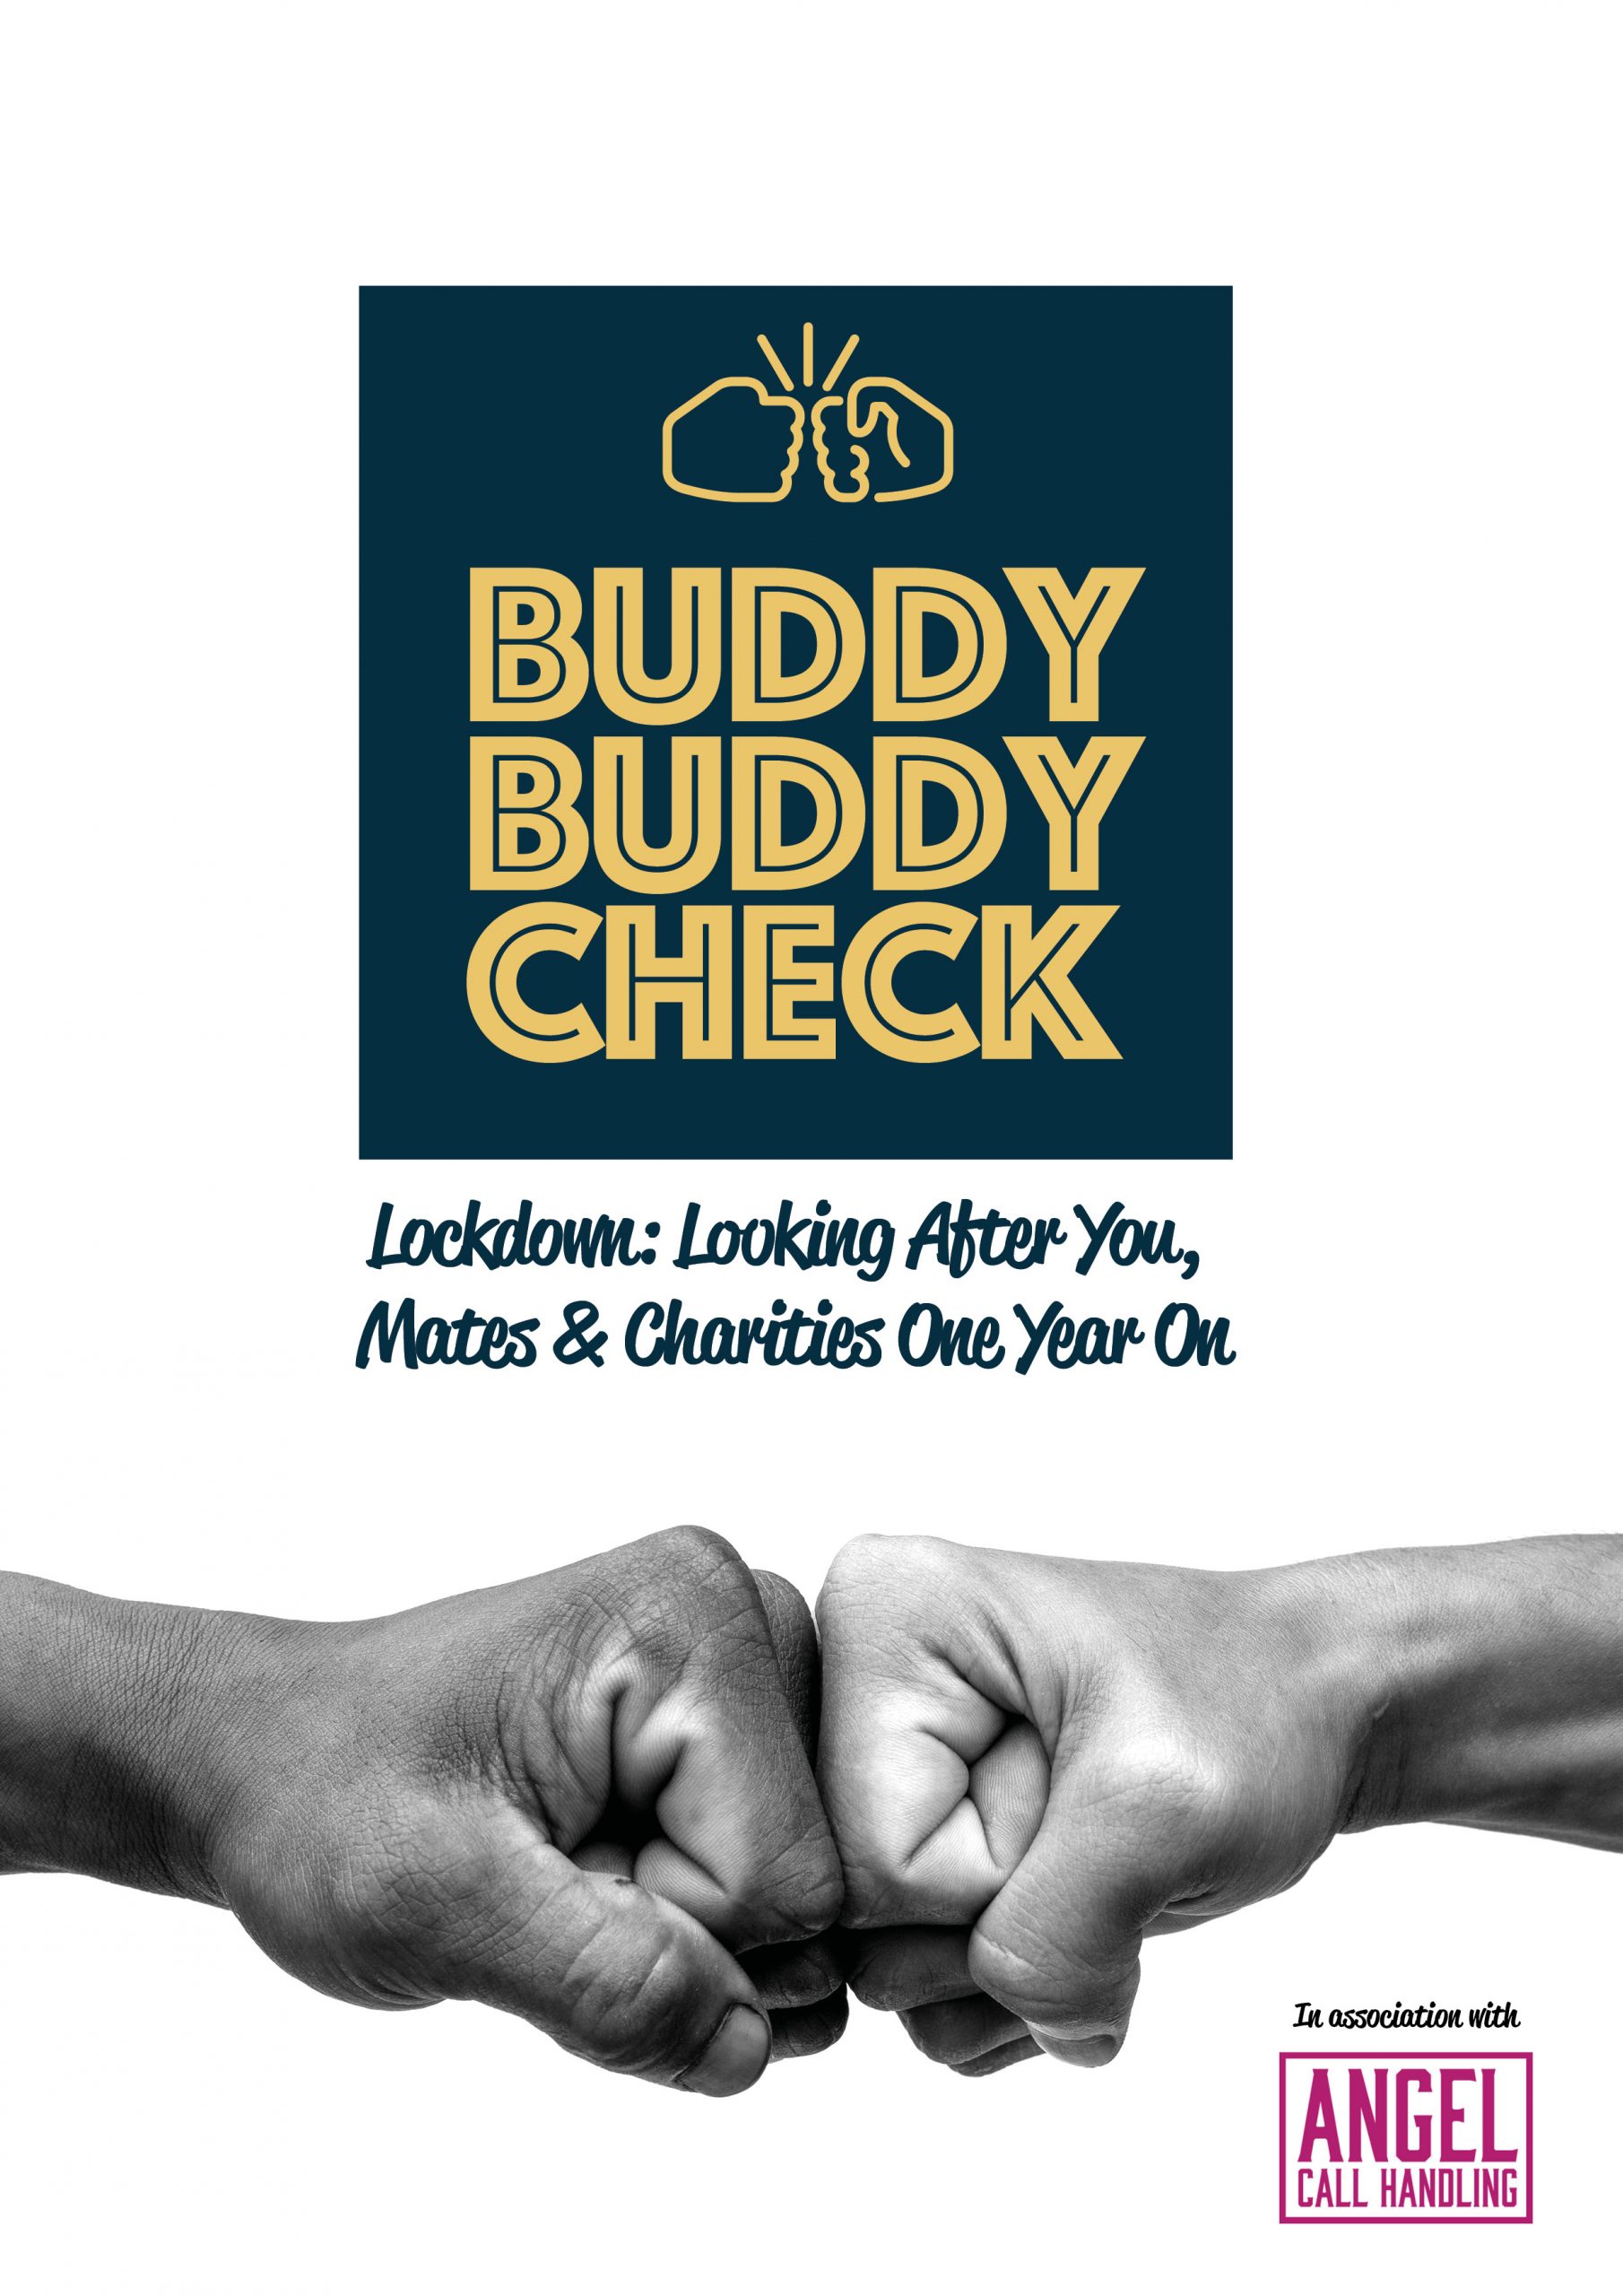 The Buddy Buddy Check Initiative – Lockdown: Looking After You, Mates & Charities One Year On In Association With Angel Call Handling